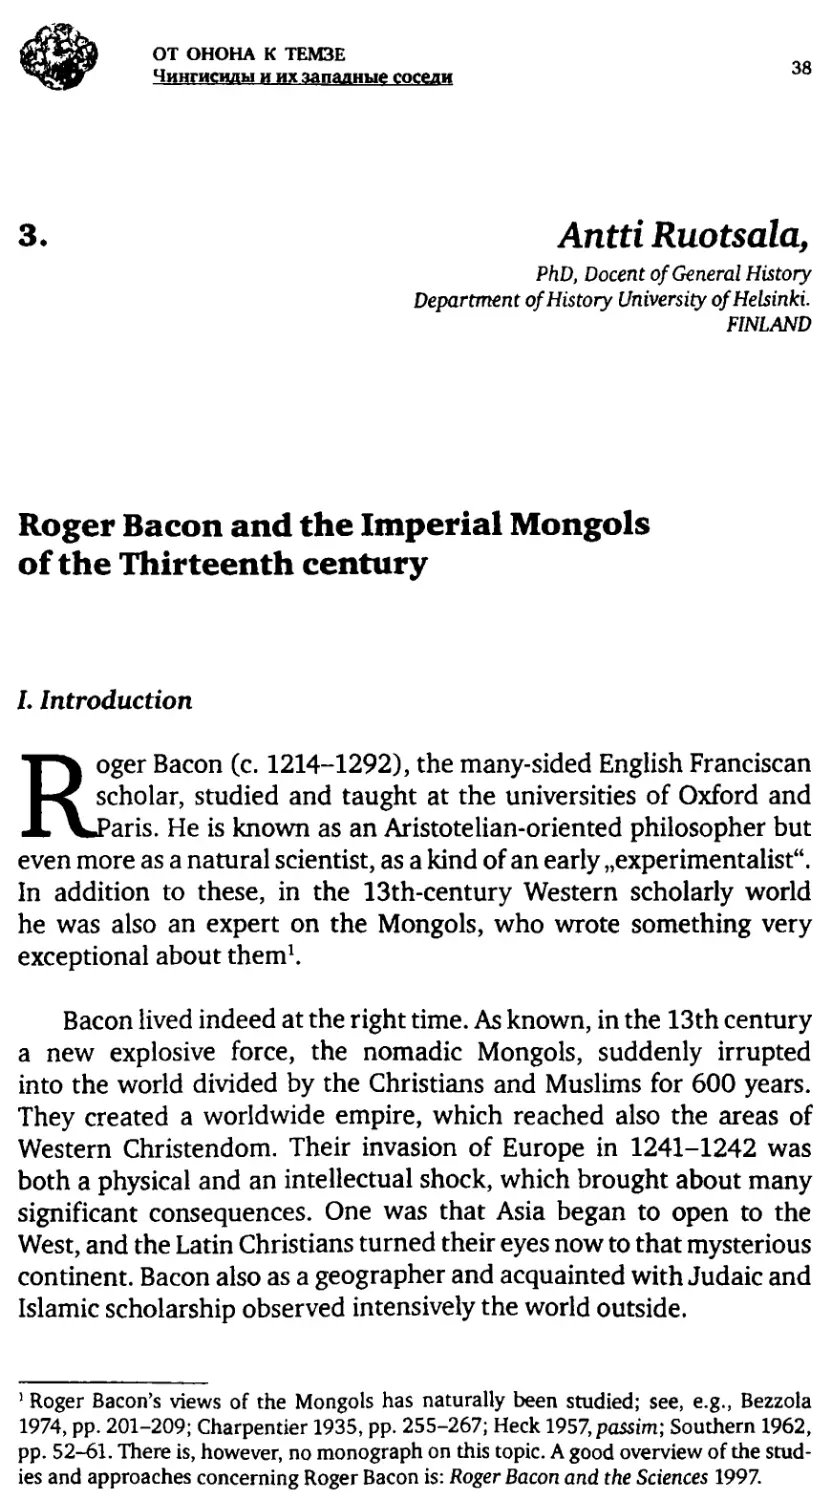 3. Antti Ruotsala. Roger Bacon and the Imperial Mongols of the Thirteenth century